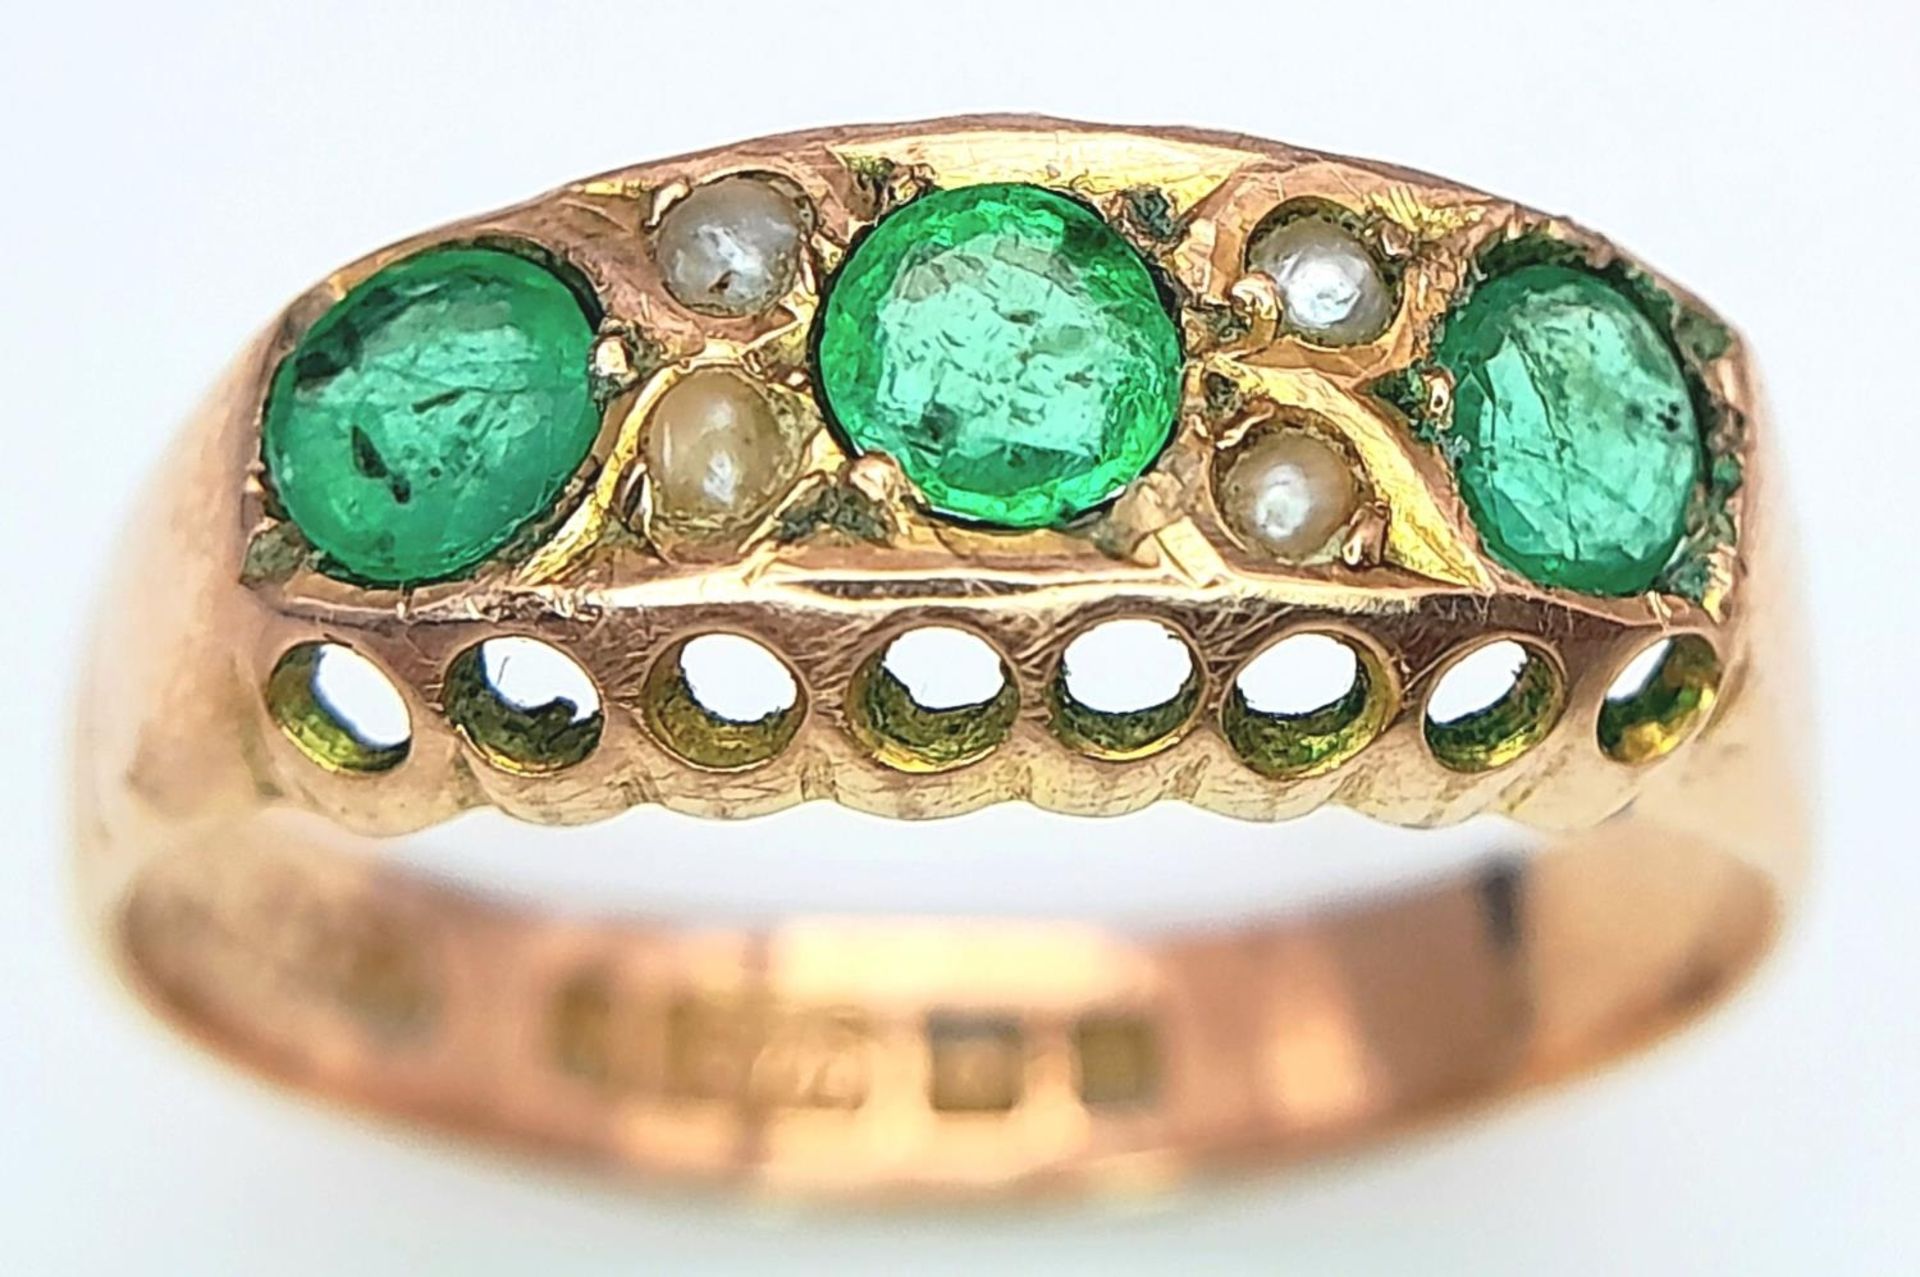 A Vintage 9K Yellow Gold Emerald and Seed Pearl Ring. Size P, 2.22g total weight.